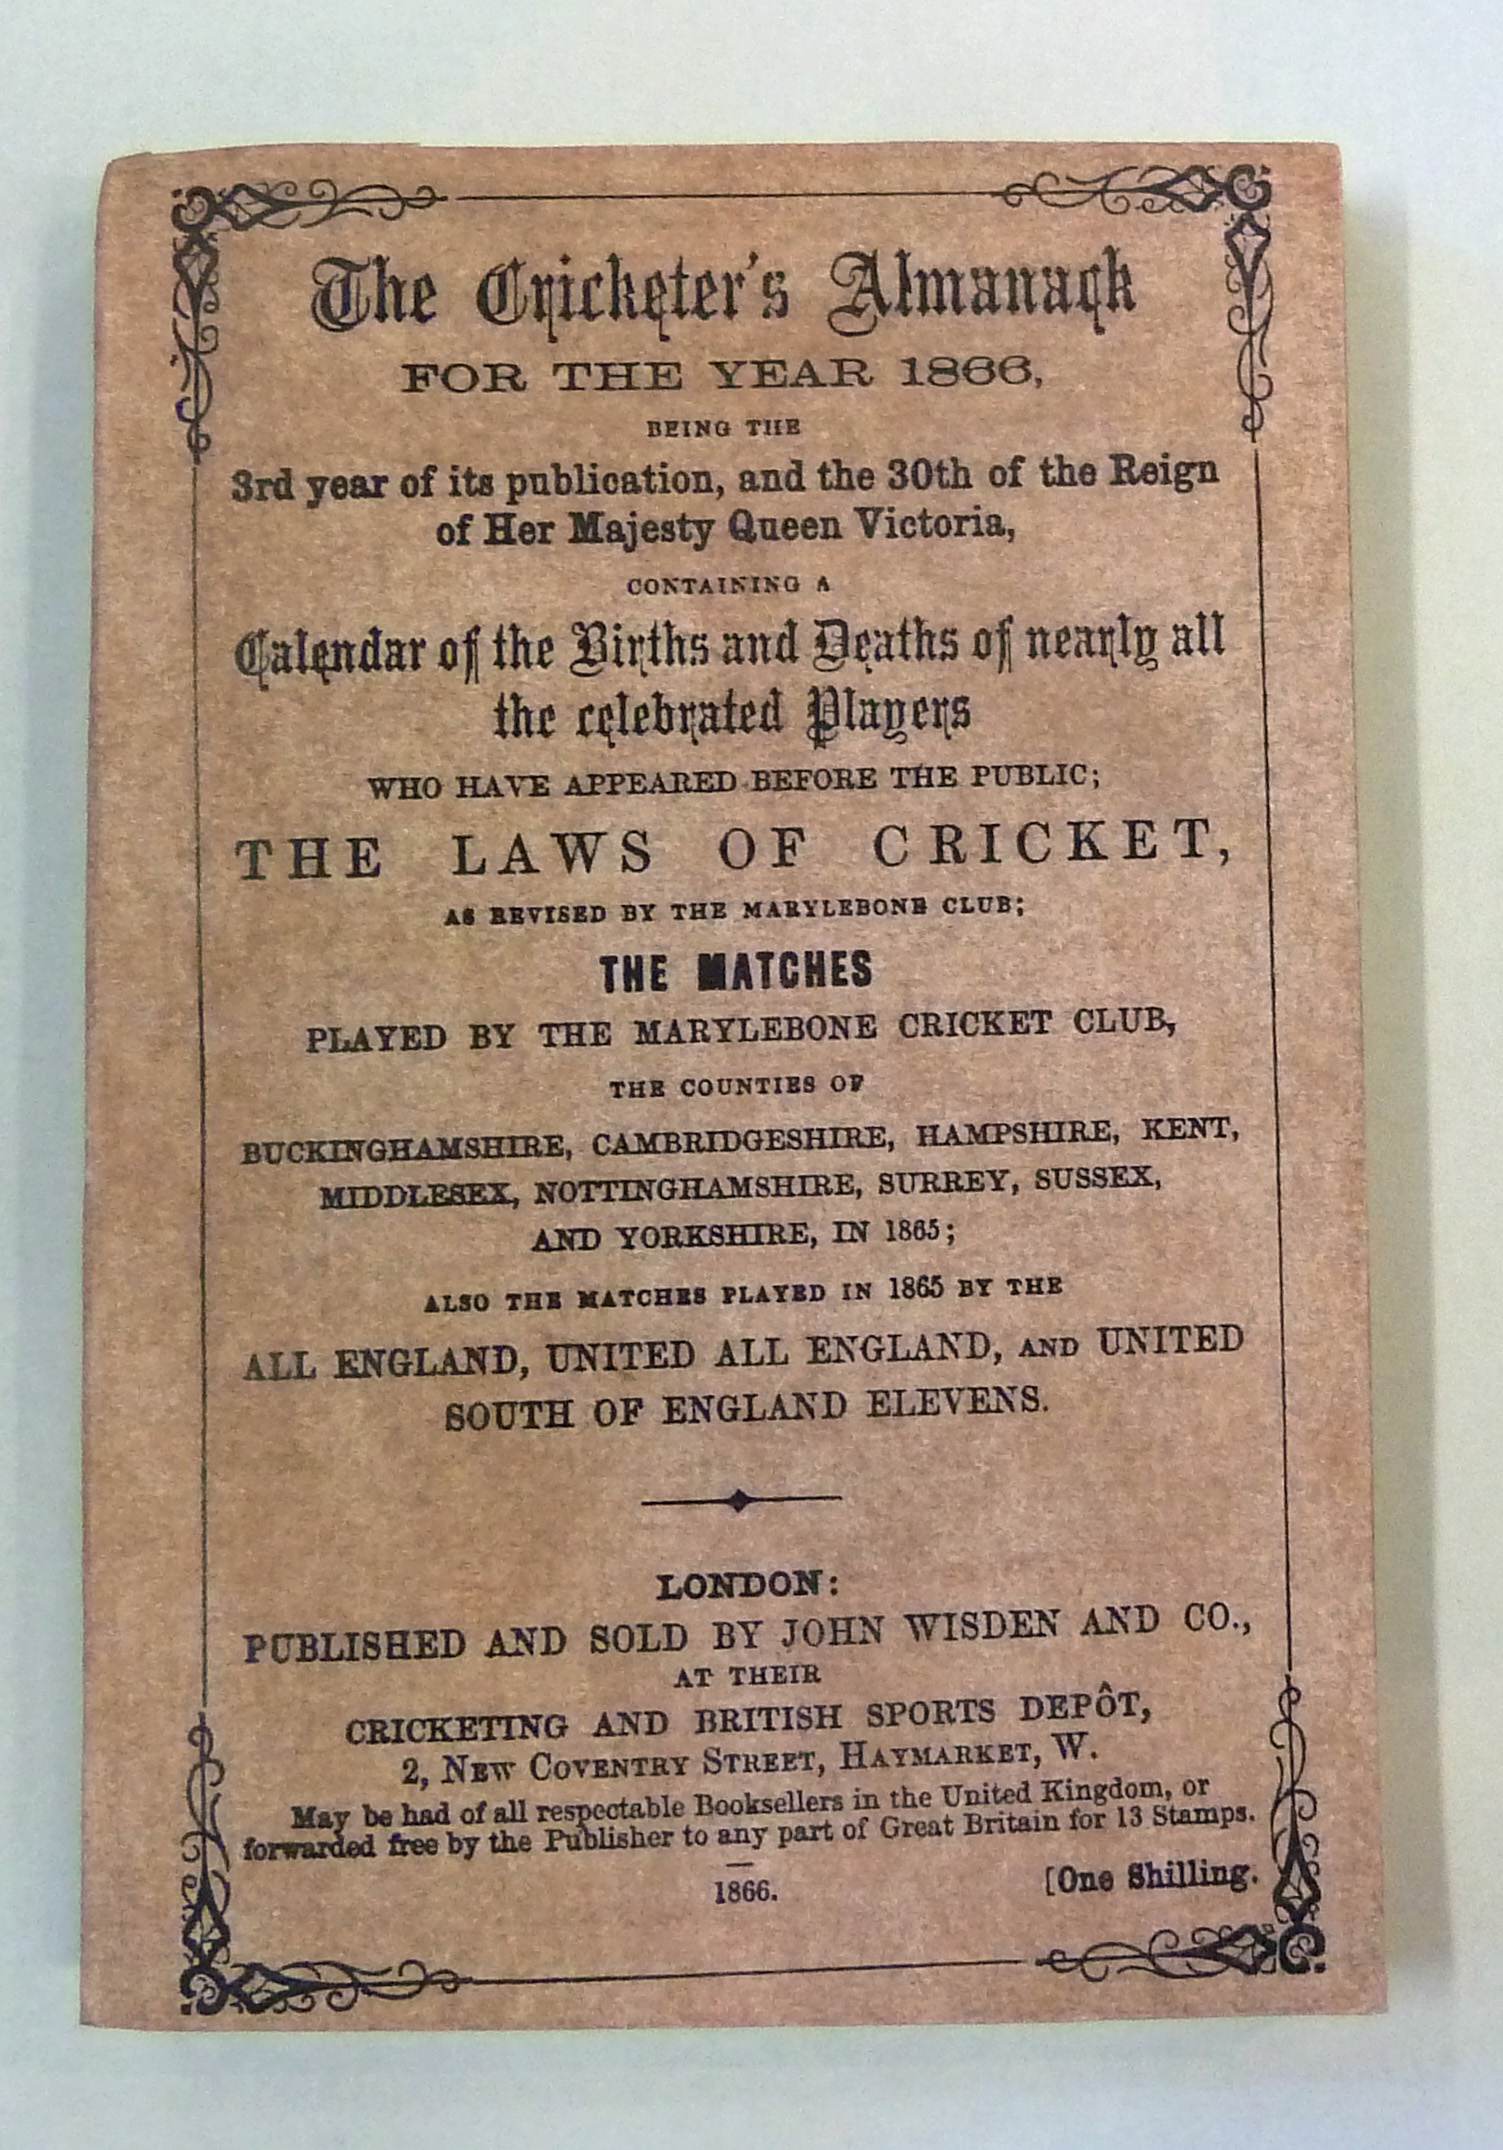 **Wisden The Cricketer's Almanack for the Year 1866